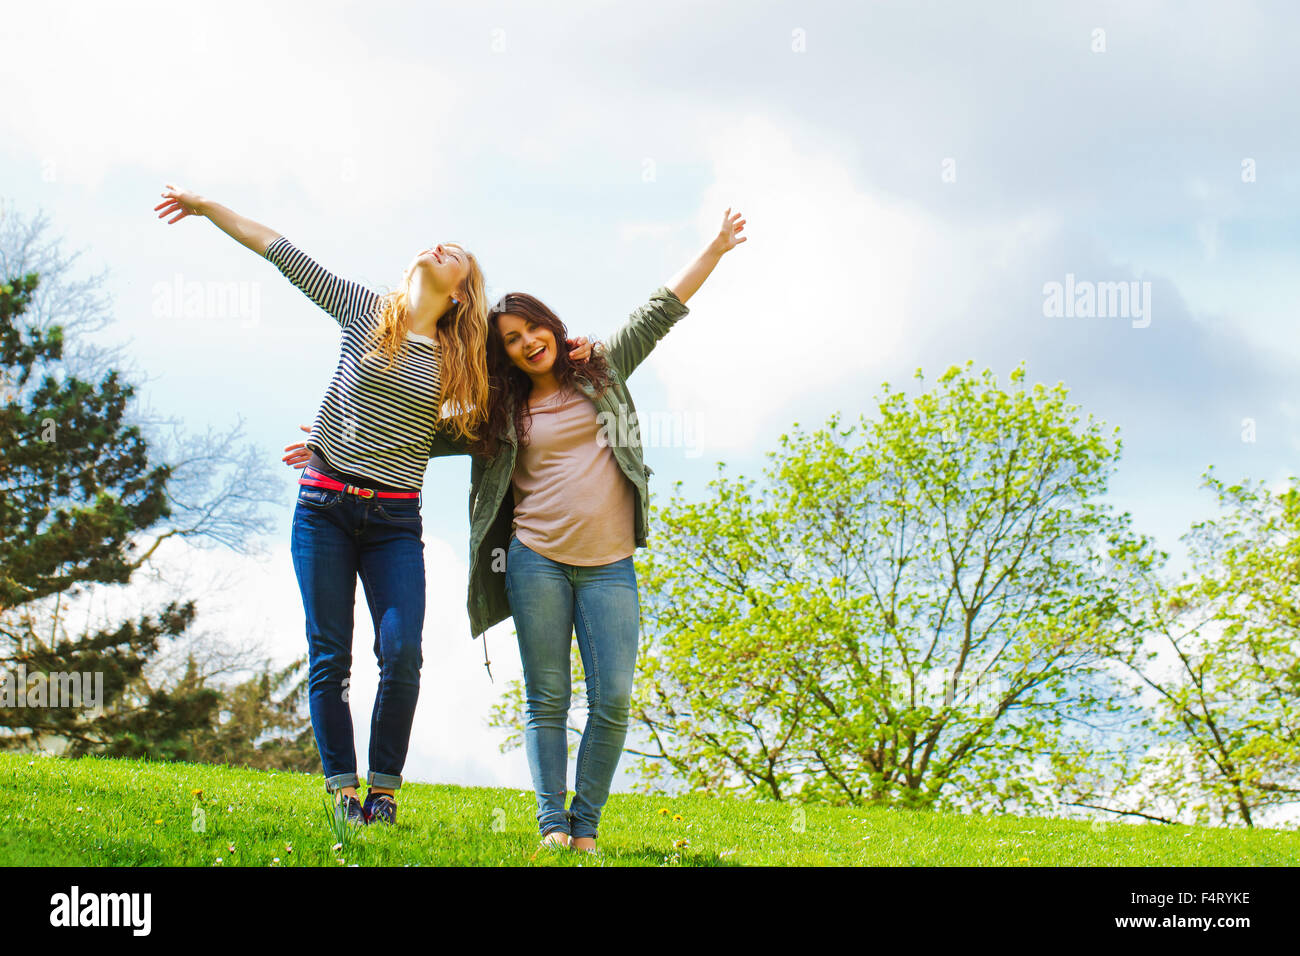 Two happy girls in nature Stock Photo